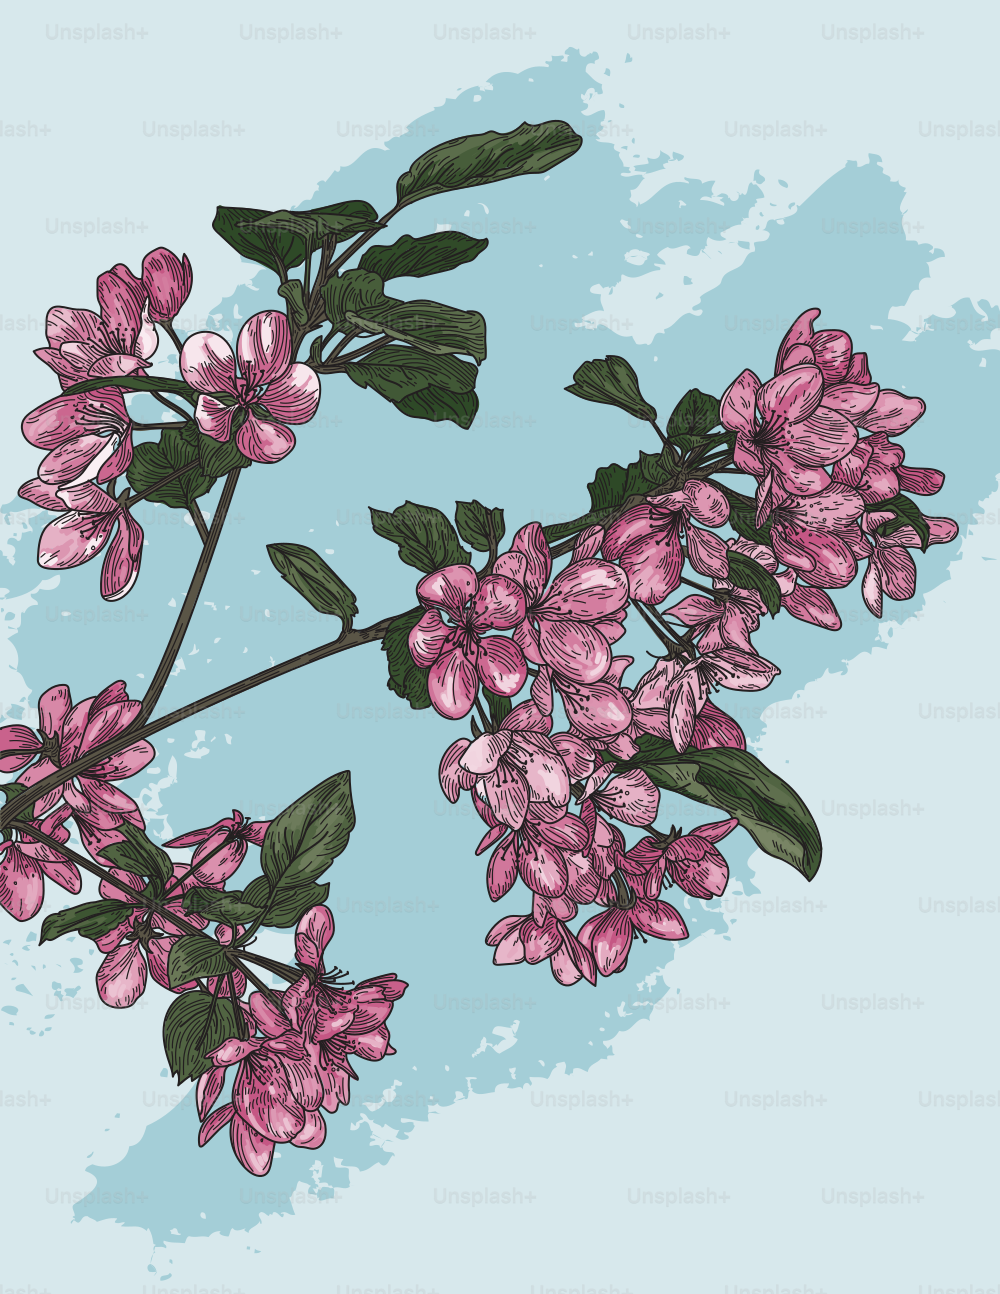 Detailed line artwork of some blossoms on a branch of a flowering crabapple tree.